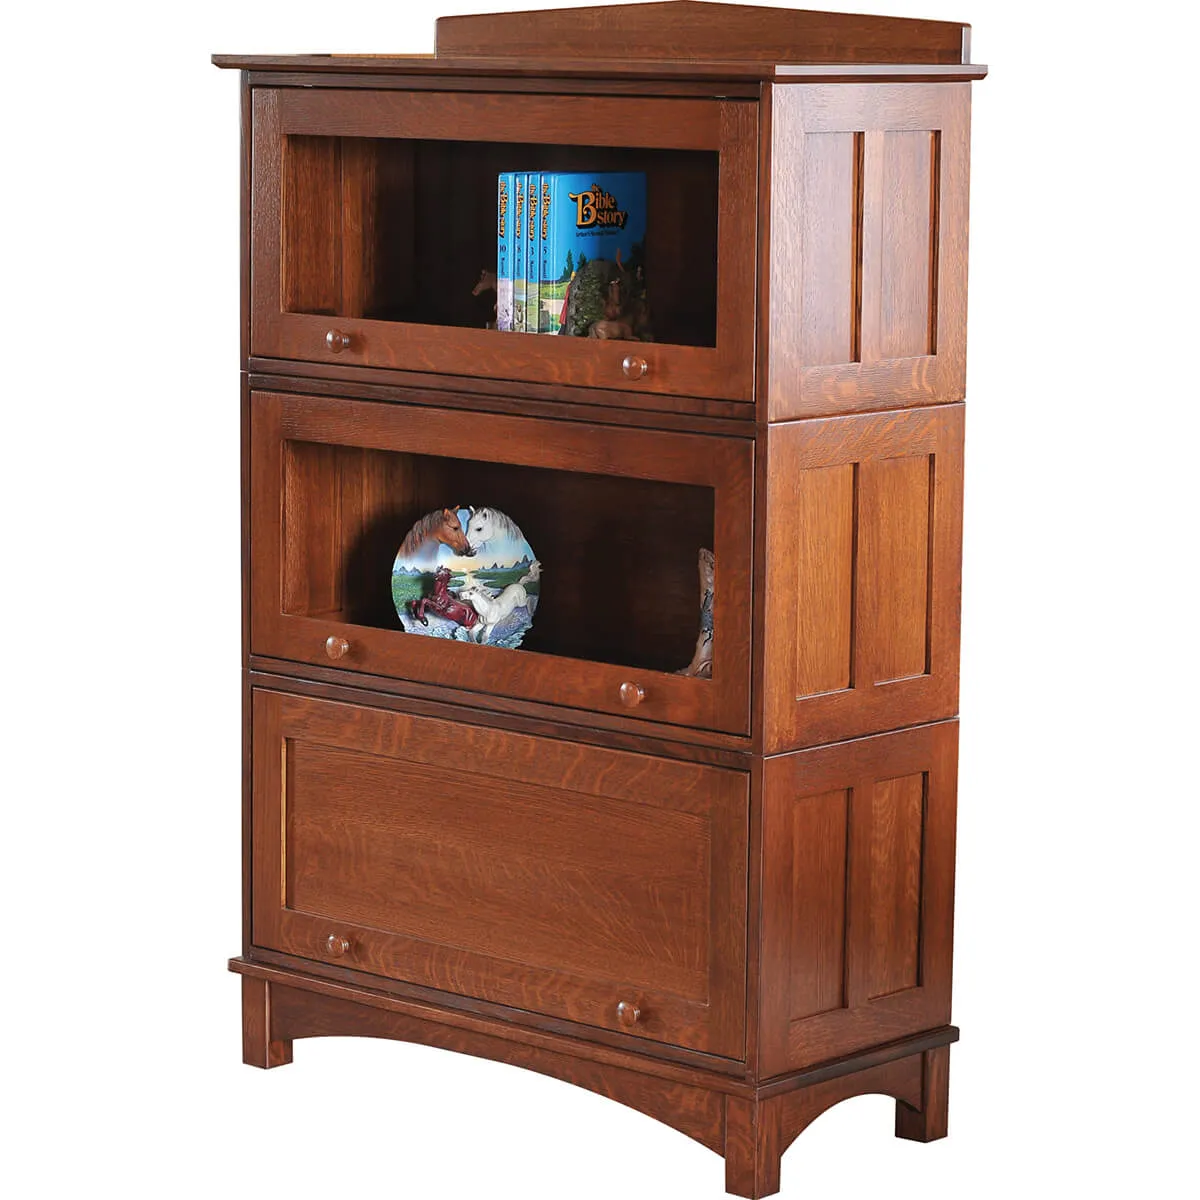 Barrister Bookcase - Stackable Unit 3